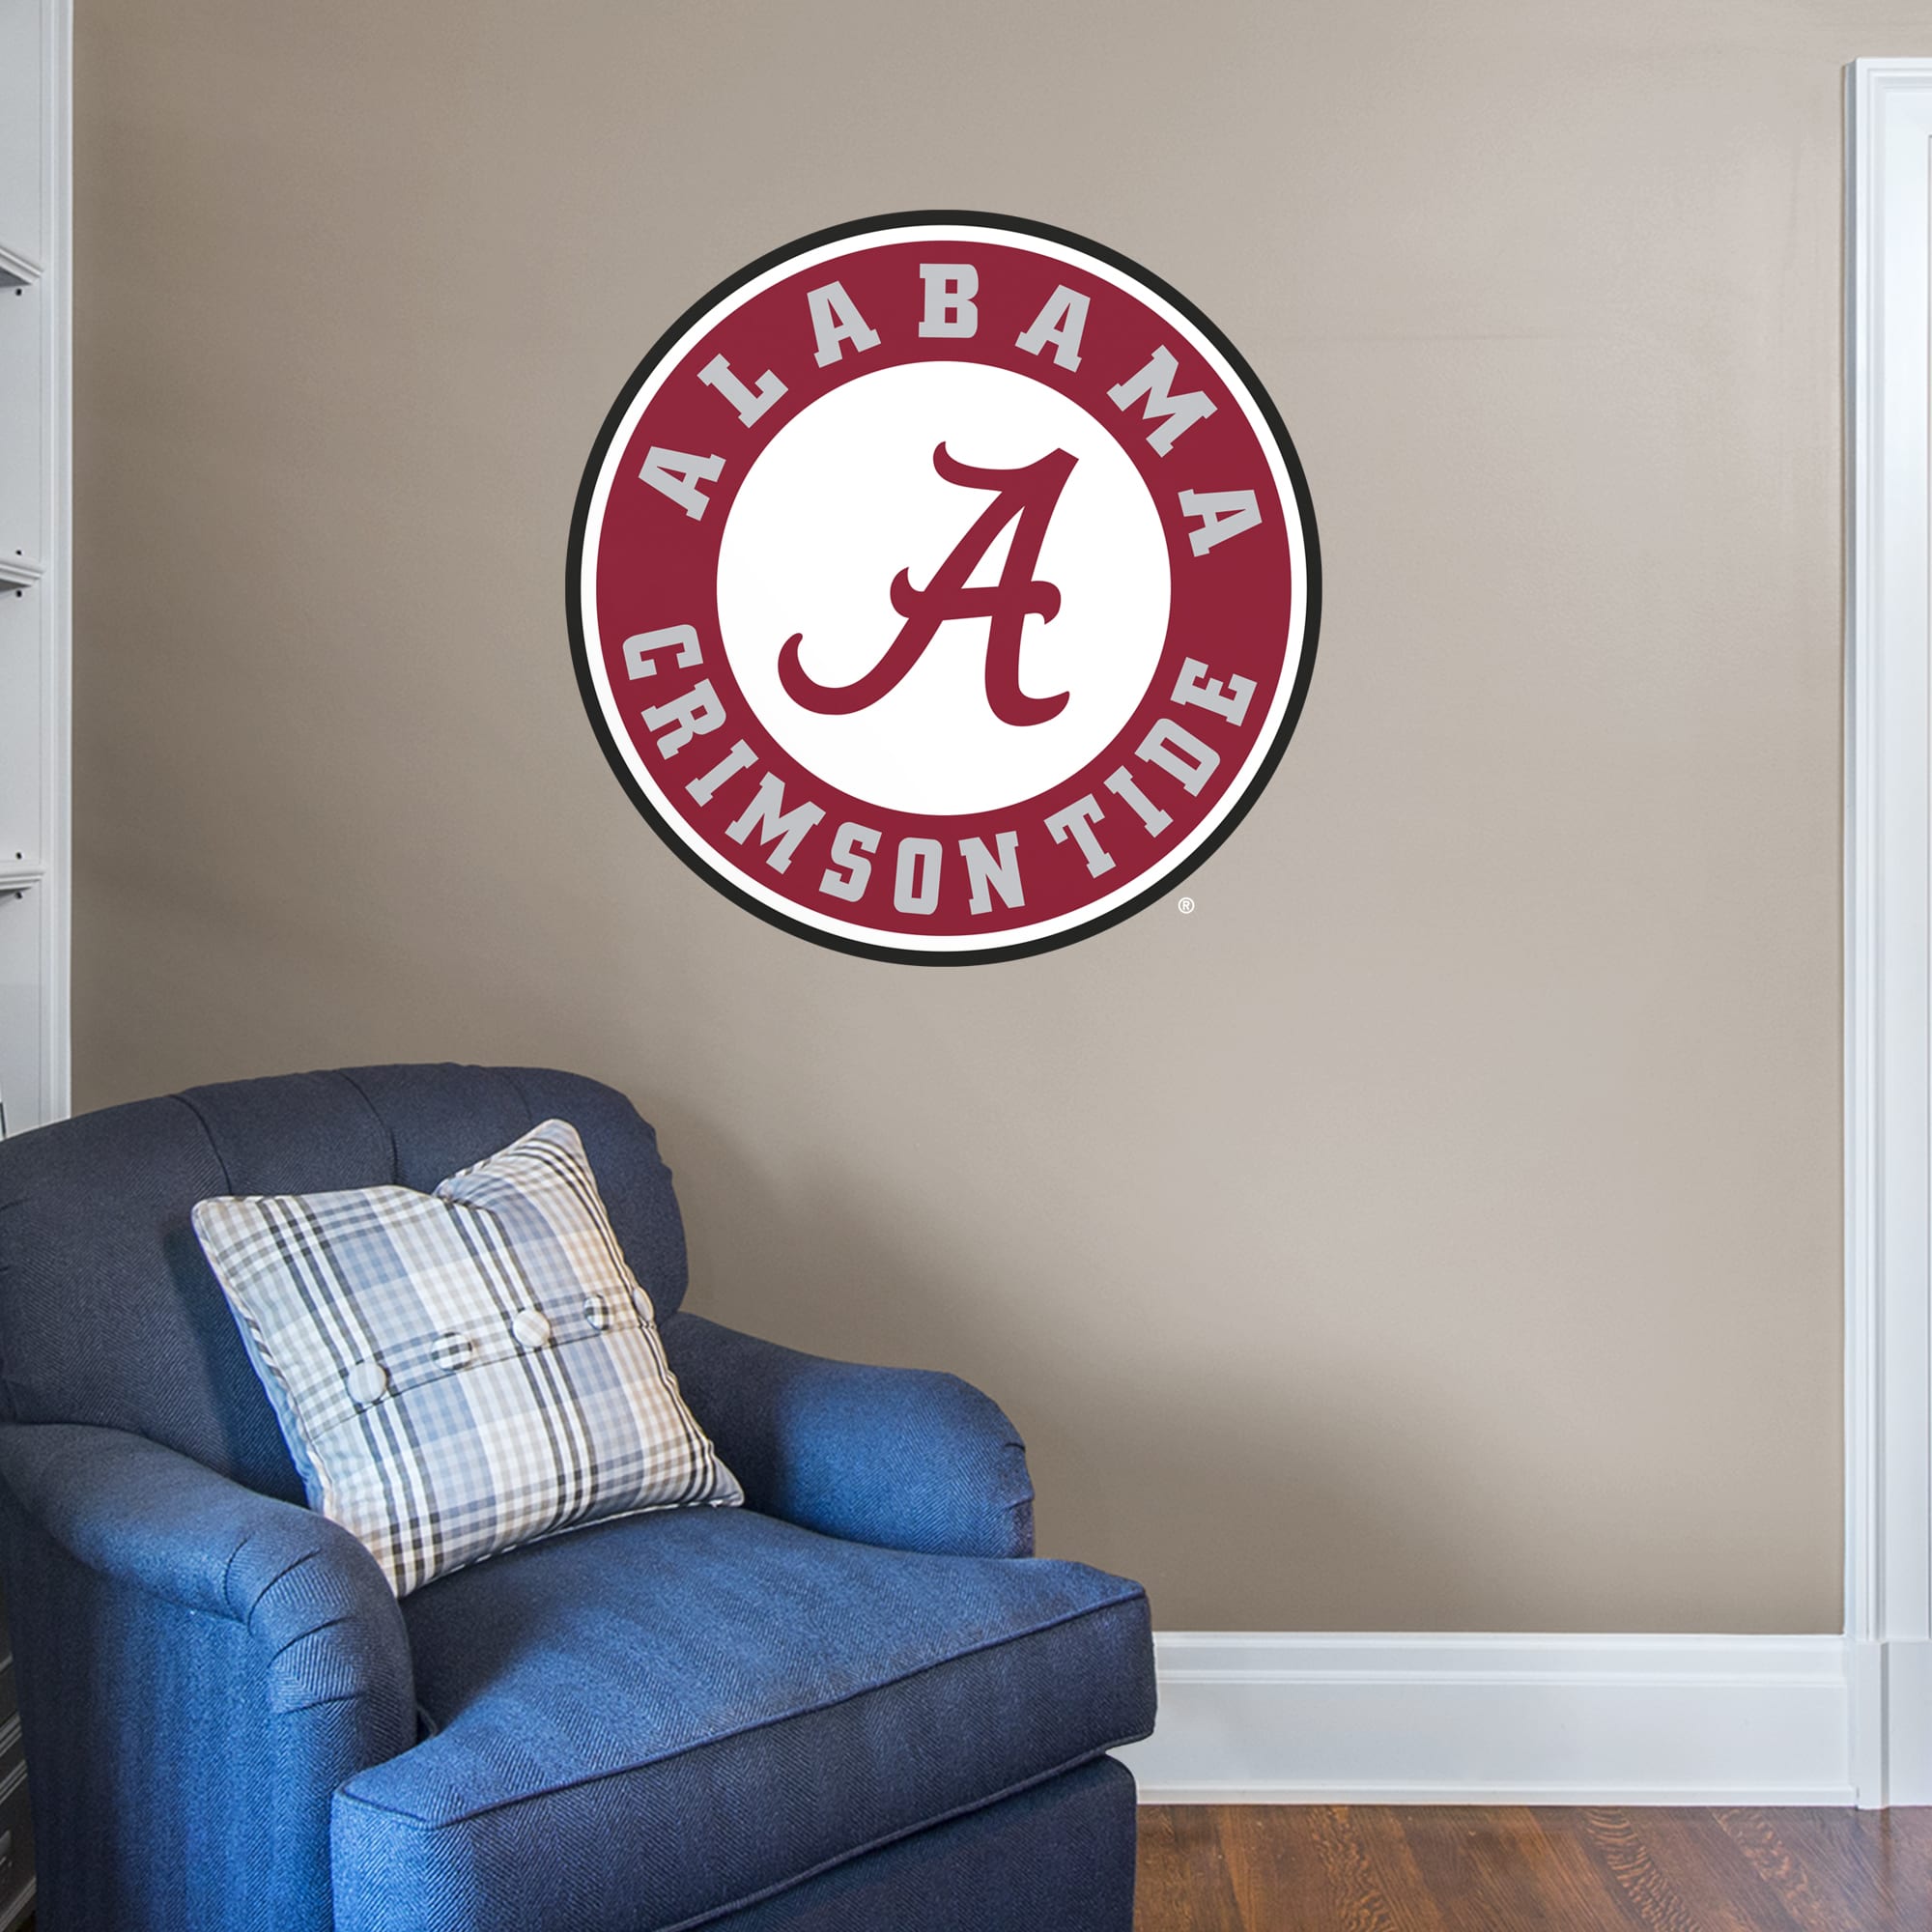 Alabama Crimson Tide: Circle Logo - Officially Licensed Removable Wall Decal Giant Logo (39"W x 39"H) by Fathead | Vinyl